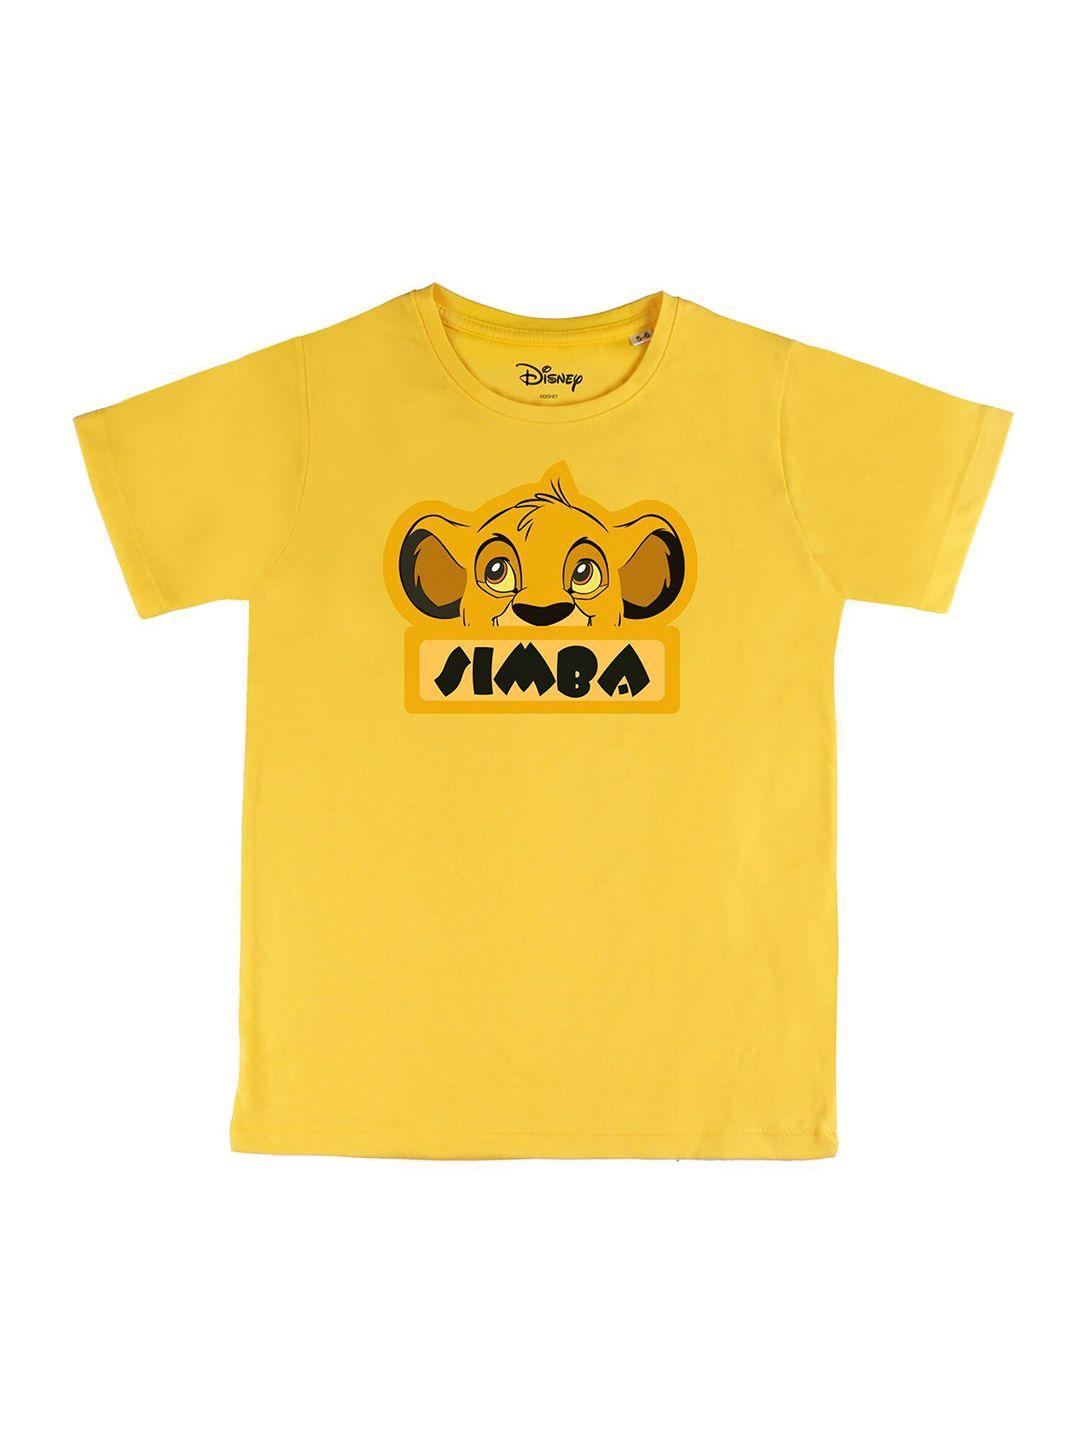 disney by wear your mind boys yellow printed applique t-shirt